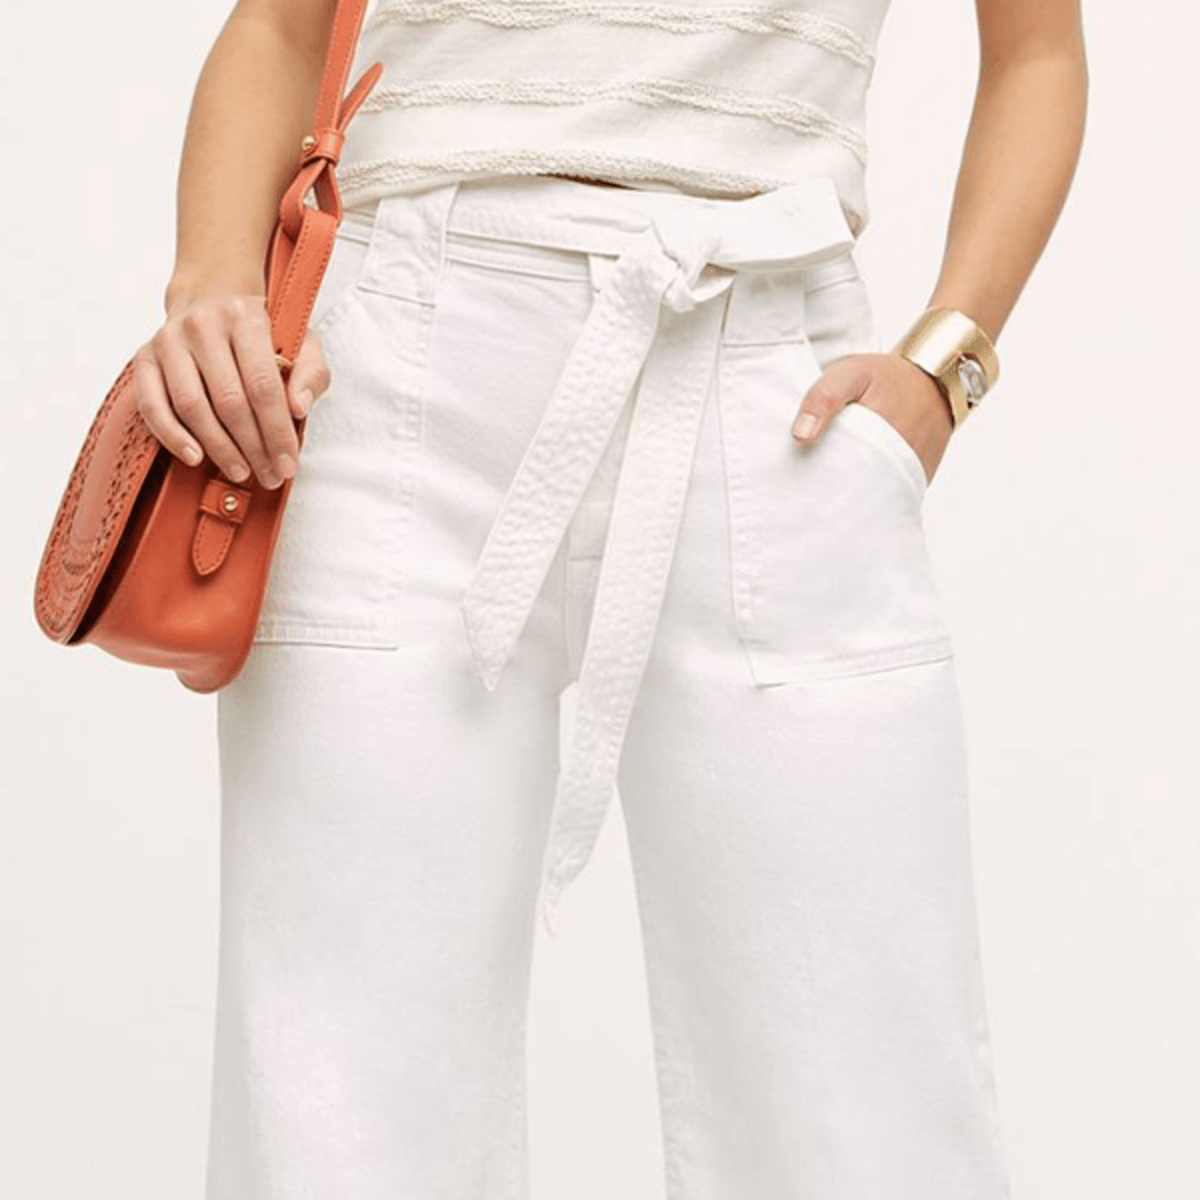 lightweight jeans for hot weather